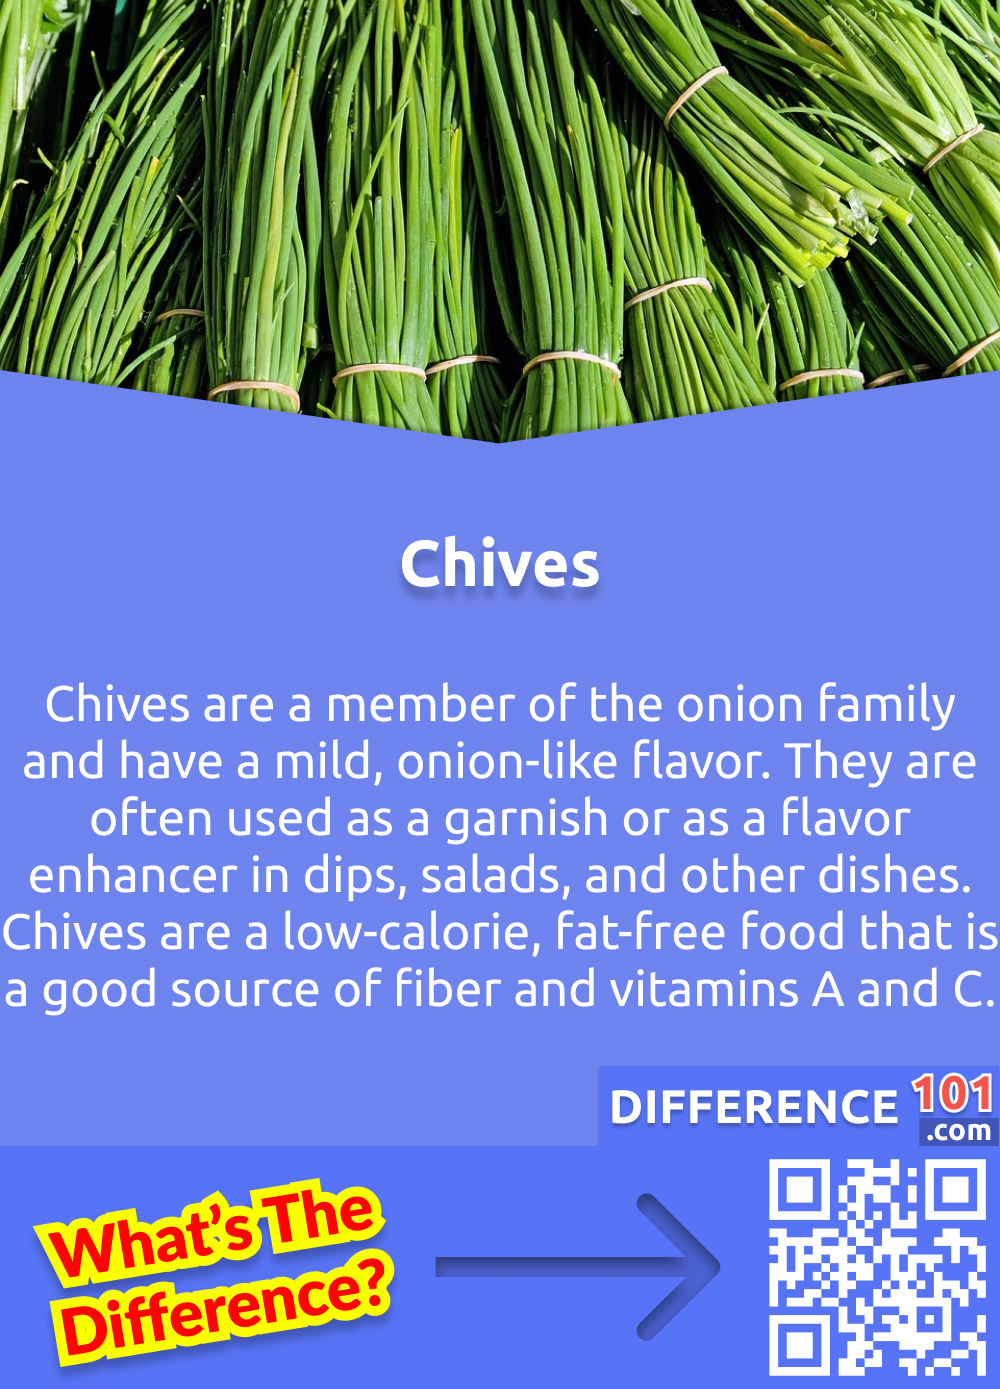 What Is Chives? Chives are a member of the onion family and have a mild, onion-like flavor. They are often used as a garnish or as a flavor enhancer in dips, salads, and other dishes. Chives are a low-calorie, fat-free food that is a good source of fiber and vitamins A and C.
